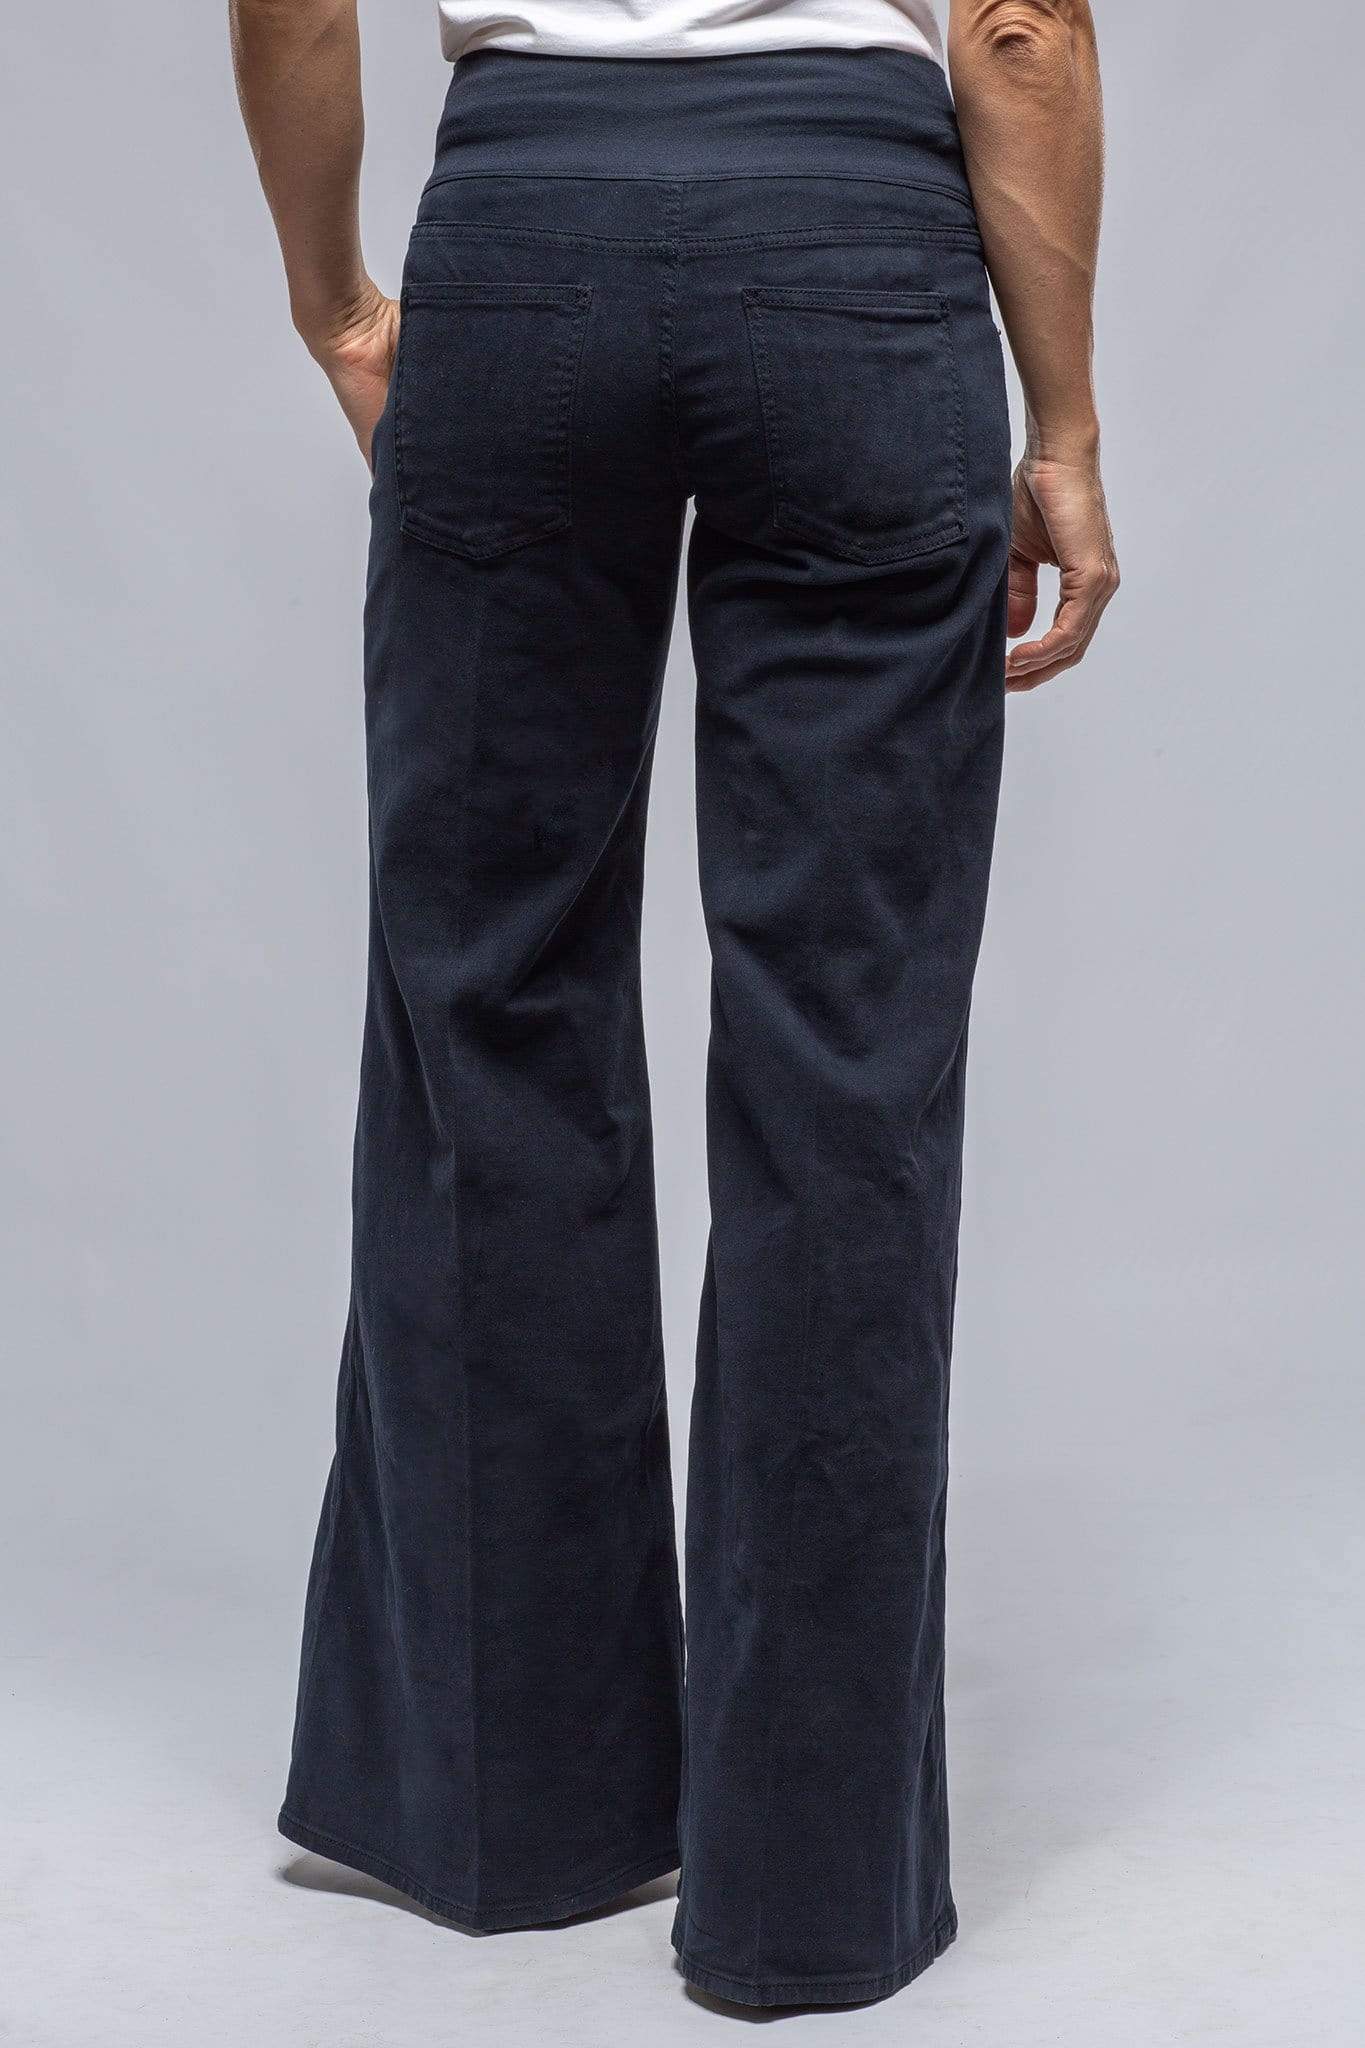 Buy Denim Four Pocket Cargo Pants Pure Cotton for Best Price, Reviews, Free  Shipping